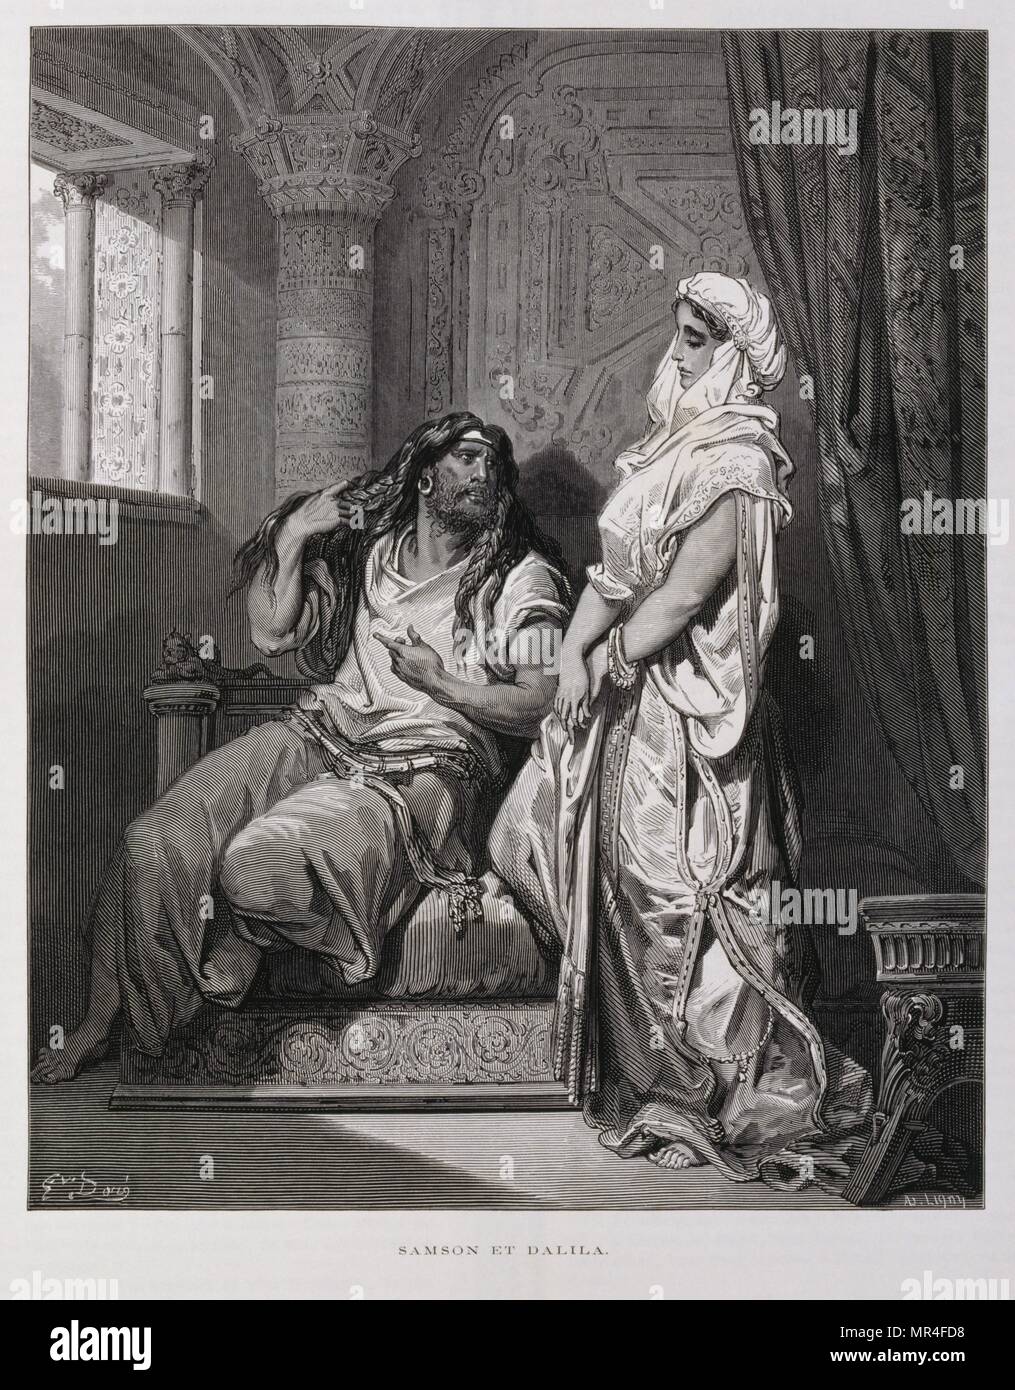 Samson and Delilah, Chapter 16, of the Book of Judges, in the Old Testament., Illustration from the Dore Bible 1866. In 1866, the French artist and illustrator Gustave Dore (1832–1883), published a series of 241 wood engravings for a new deluxe edition of the 1843 French translation of the Vulgate Bible, popularly known as the Bible de Tours. This new edition was known as La Grande Bible de Tours and its illustrations were immensely successful. Stock Photo